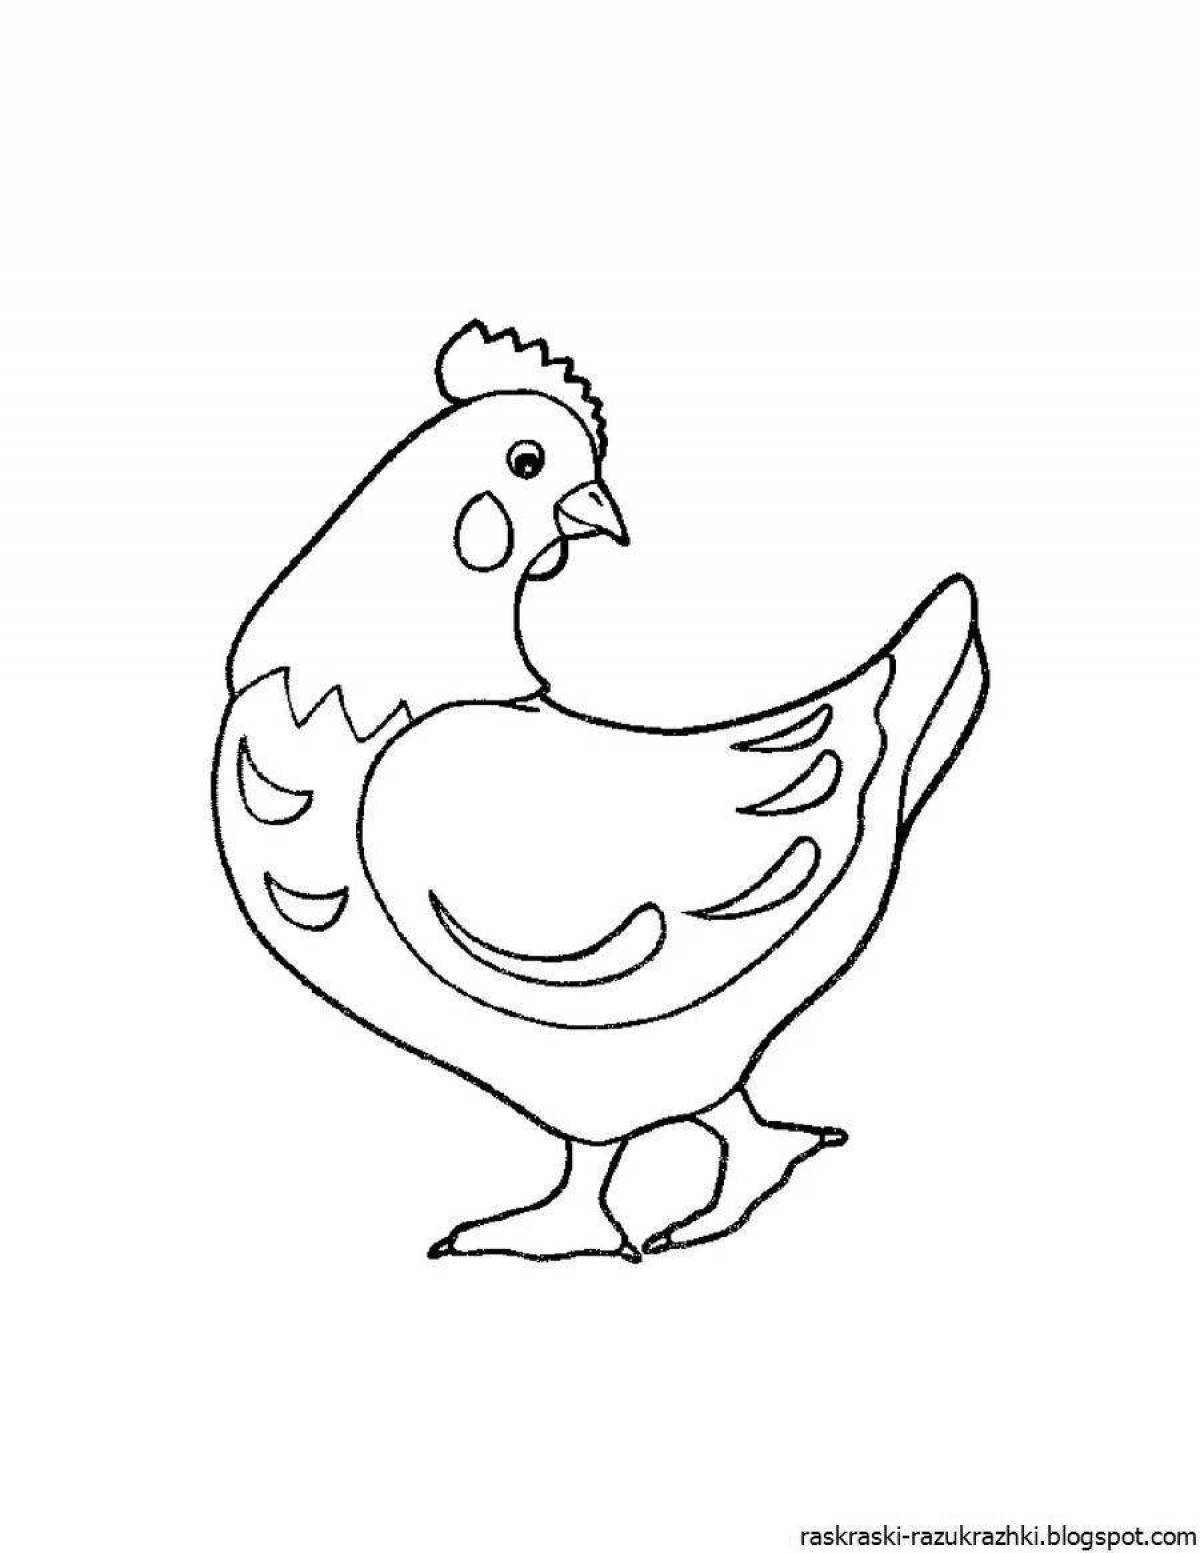 Playful chicken coloring page for kids